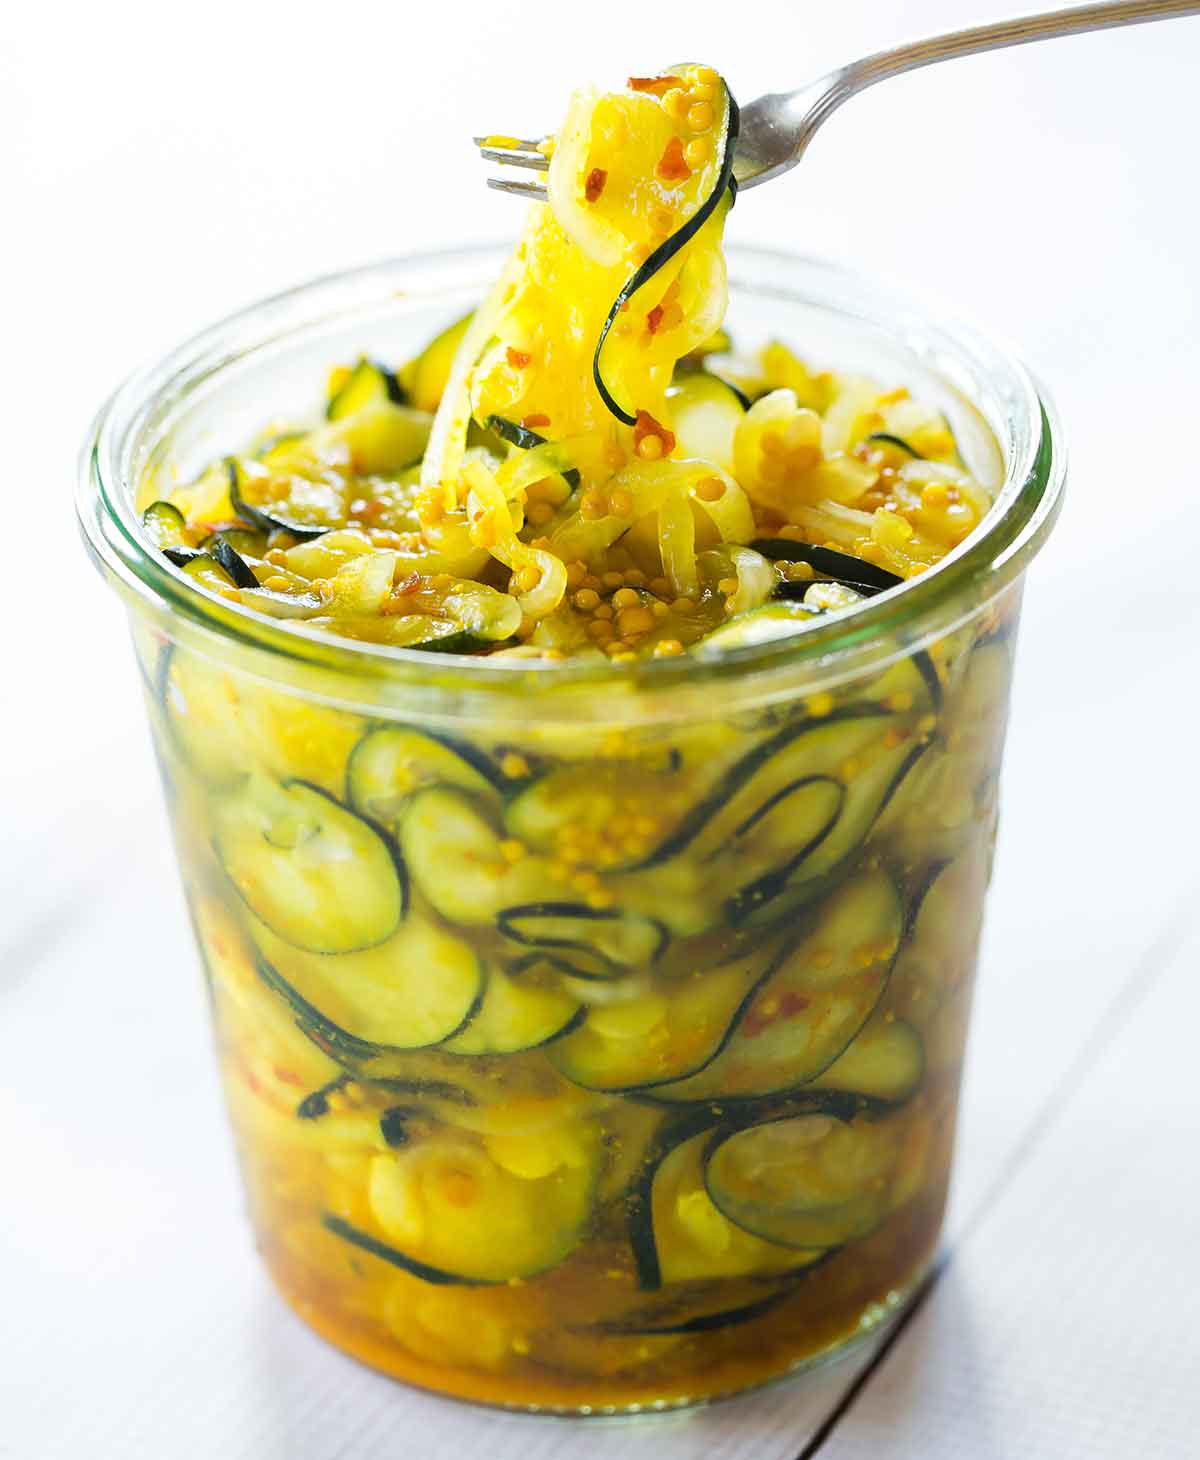 A fork lifting zucchini pickles out of a glass jar.